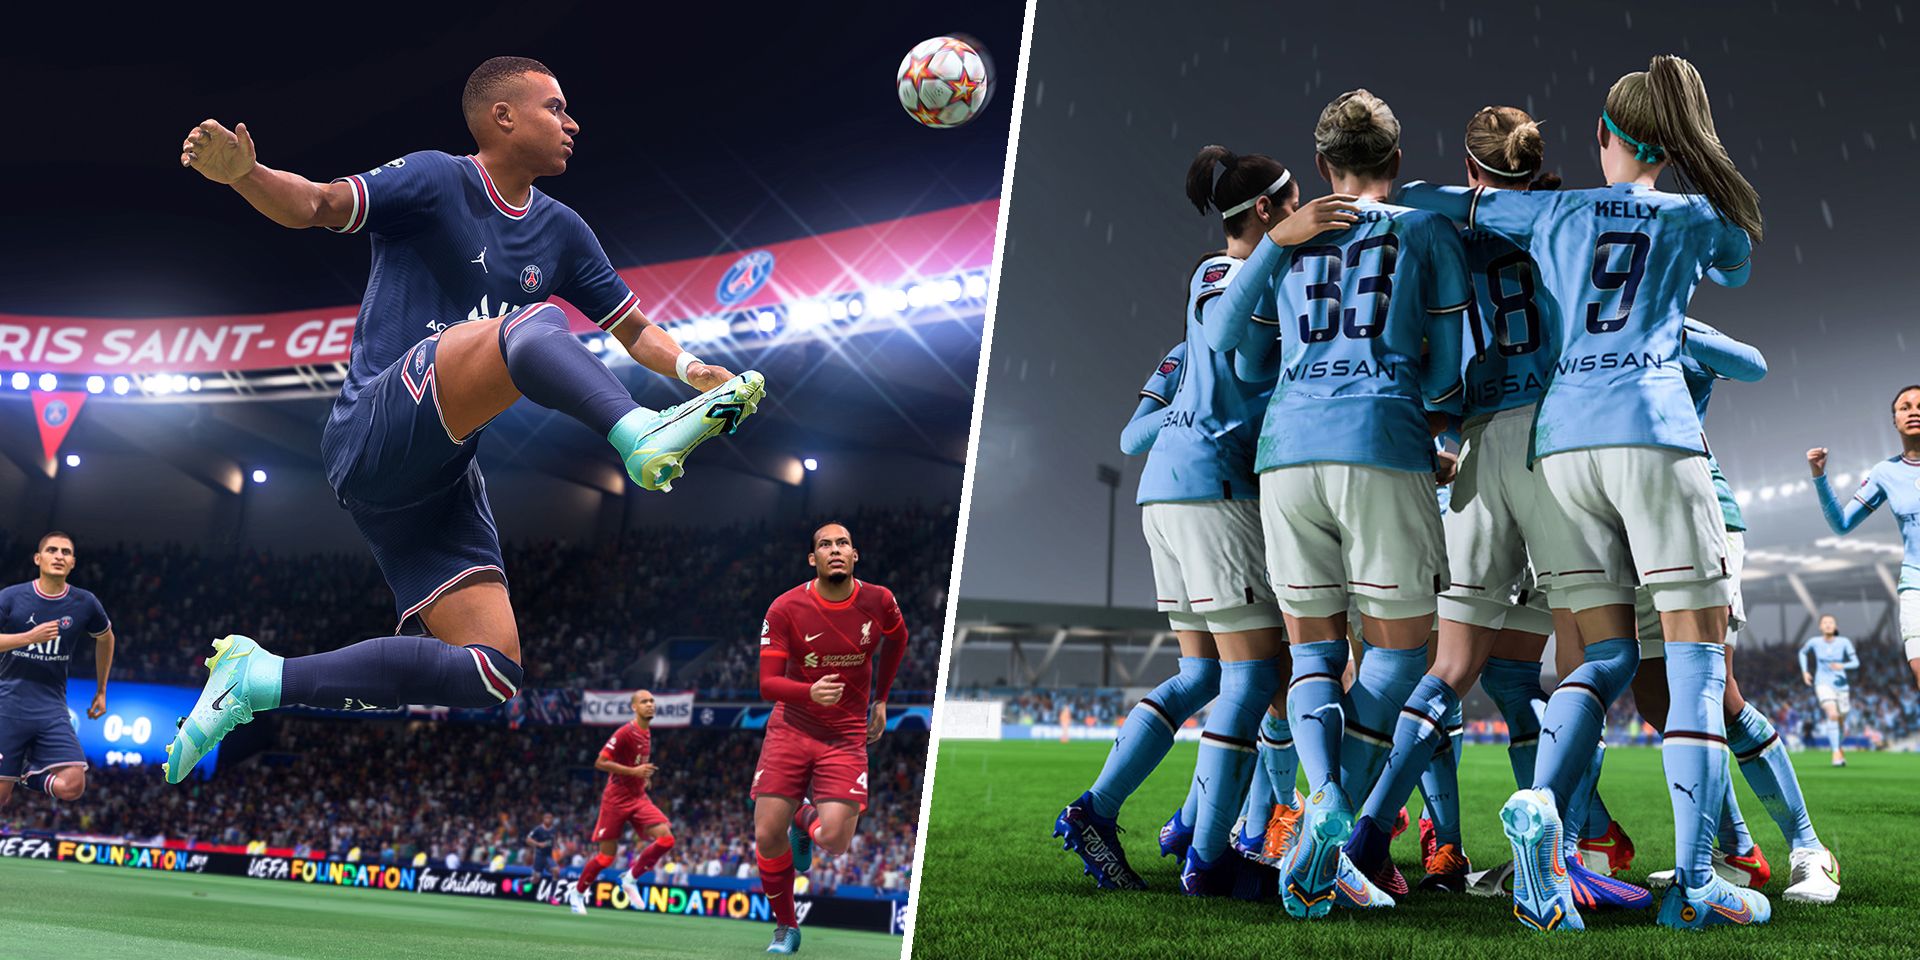 FIFA 23 To Have Cross-Play For Consoles And PC - Get2Gaming